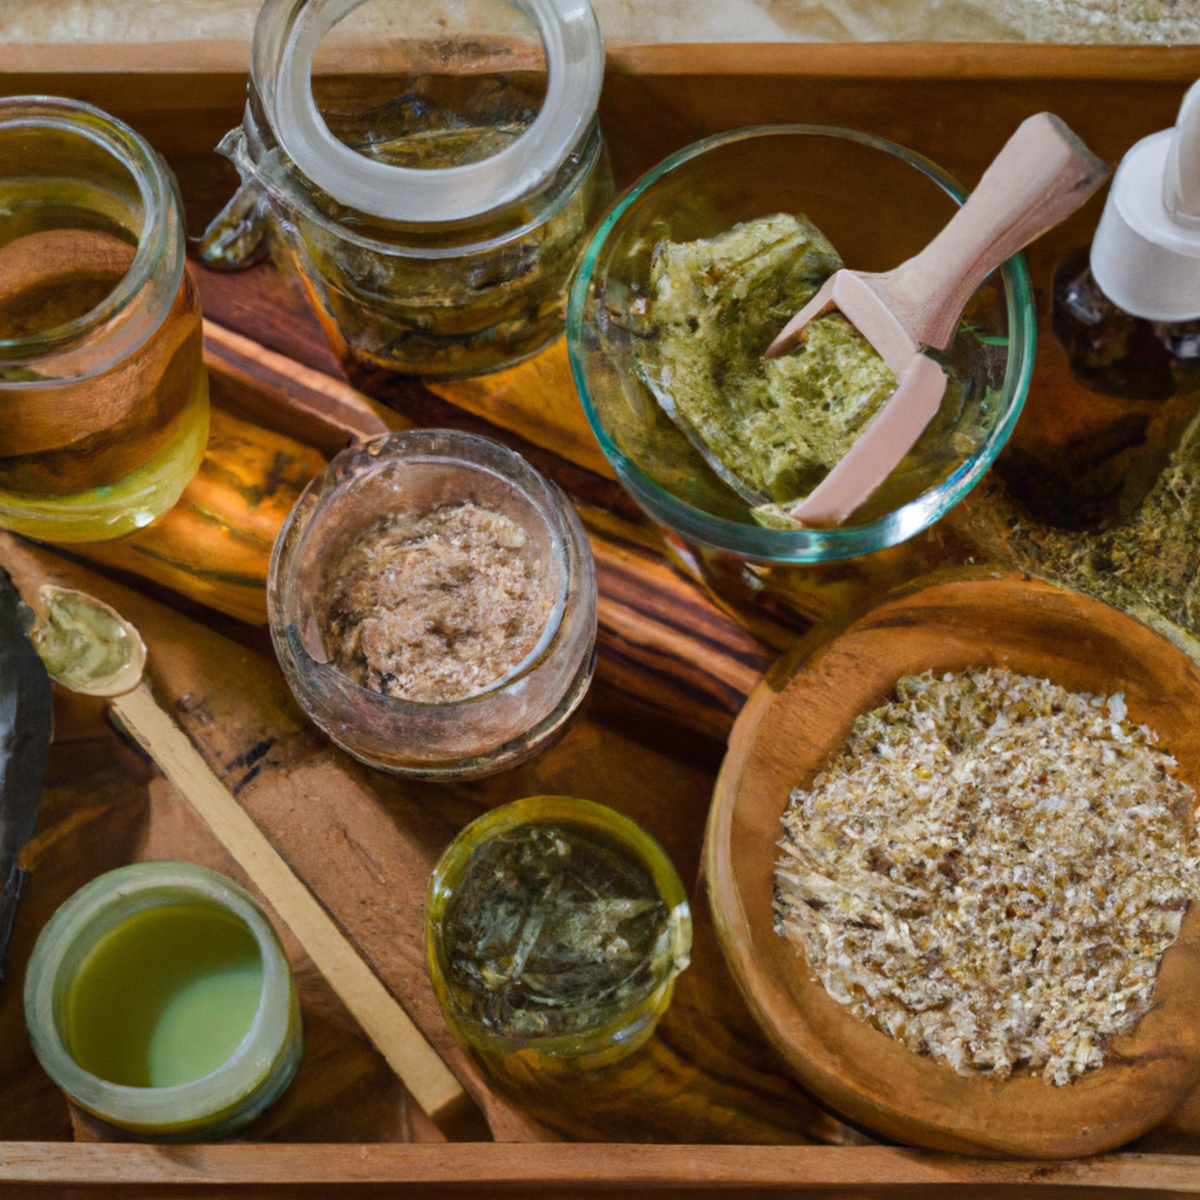 Unleash the power of nature with these natural skin care routines! From green clay masks to raw honey, this wooden tray has everything you need to combat acne the holistic way. Say goodbye to harsh chemicals and hello to a glowing complexion!